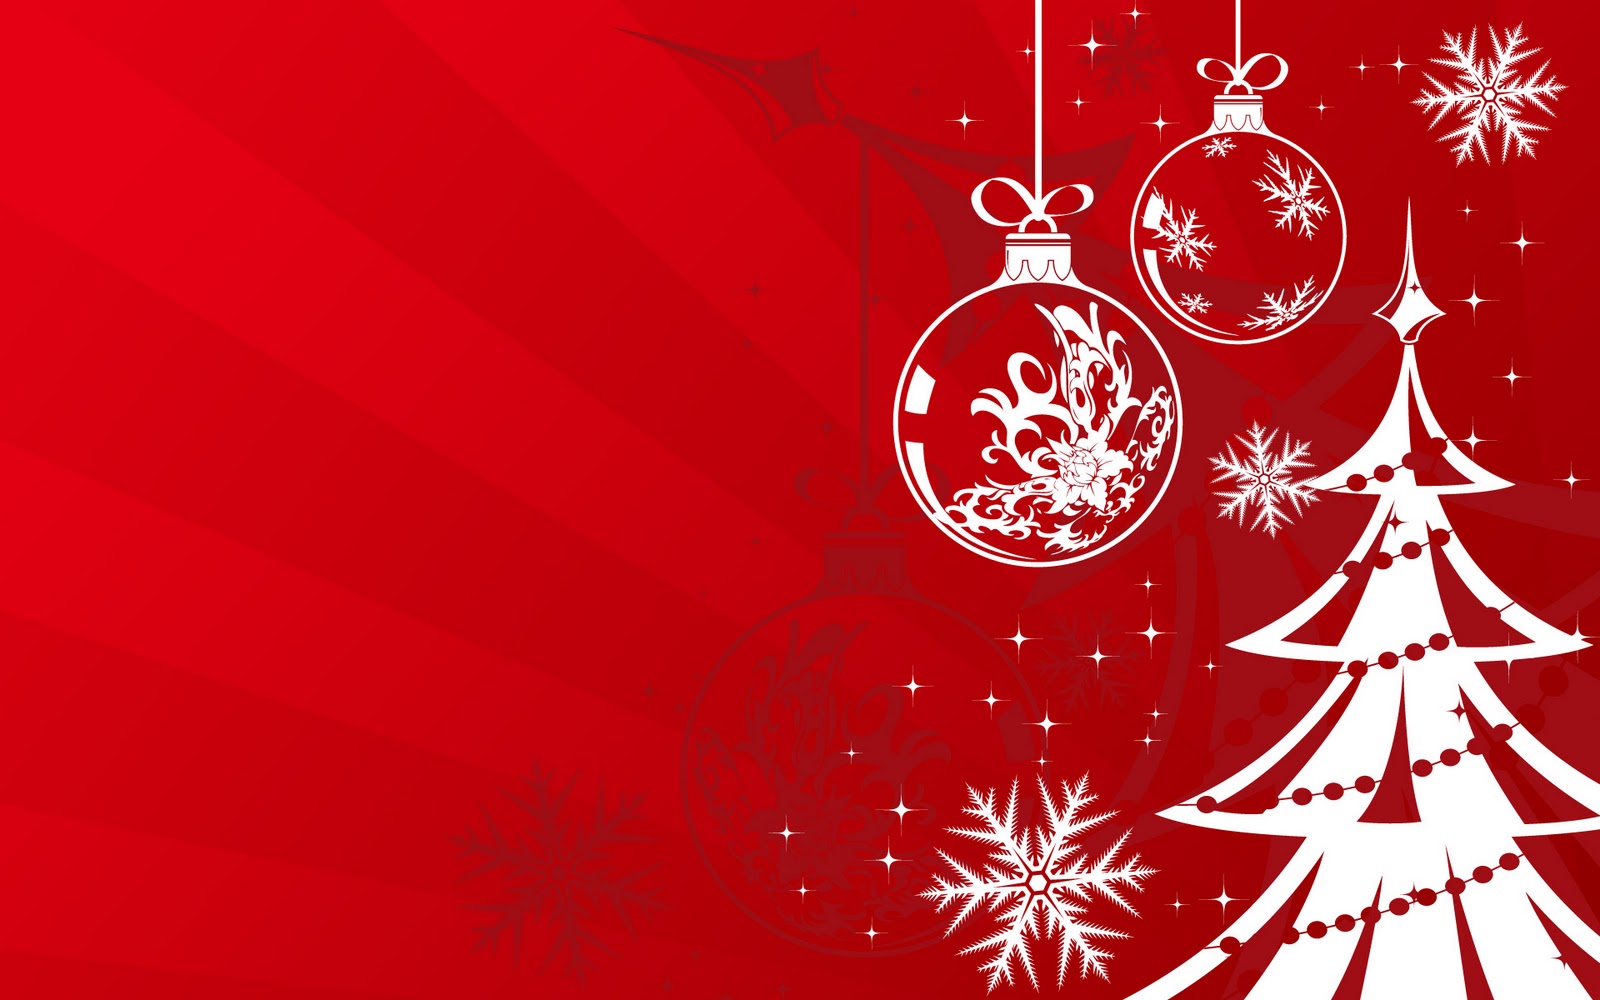 Abstract Christmas Tree Exclusive HD Wallpaper